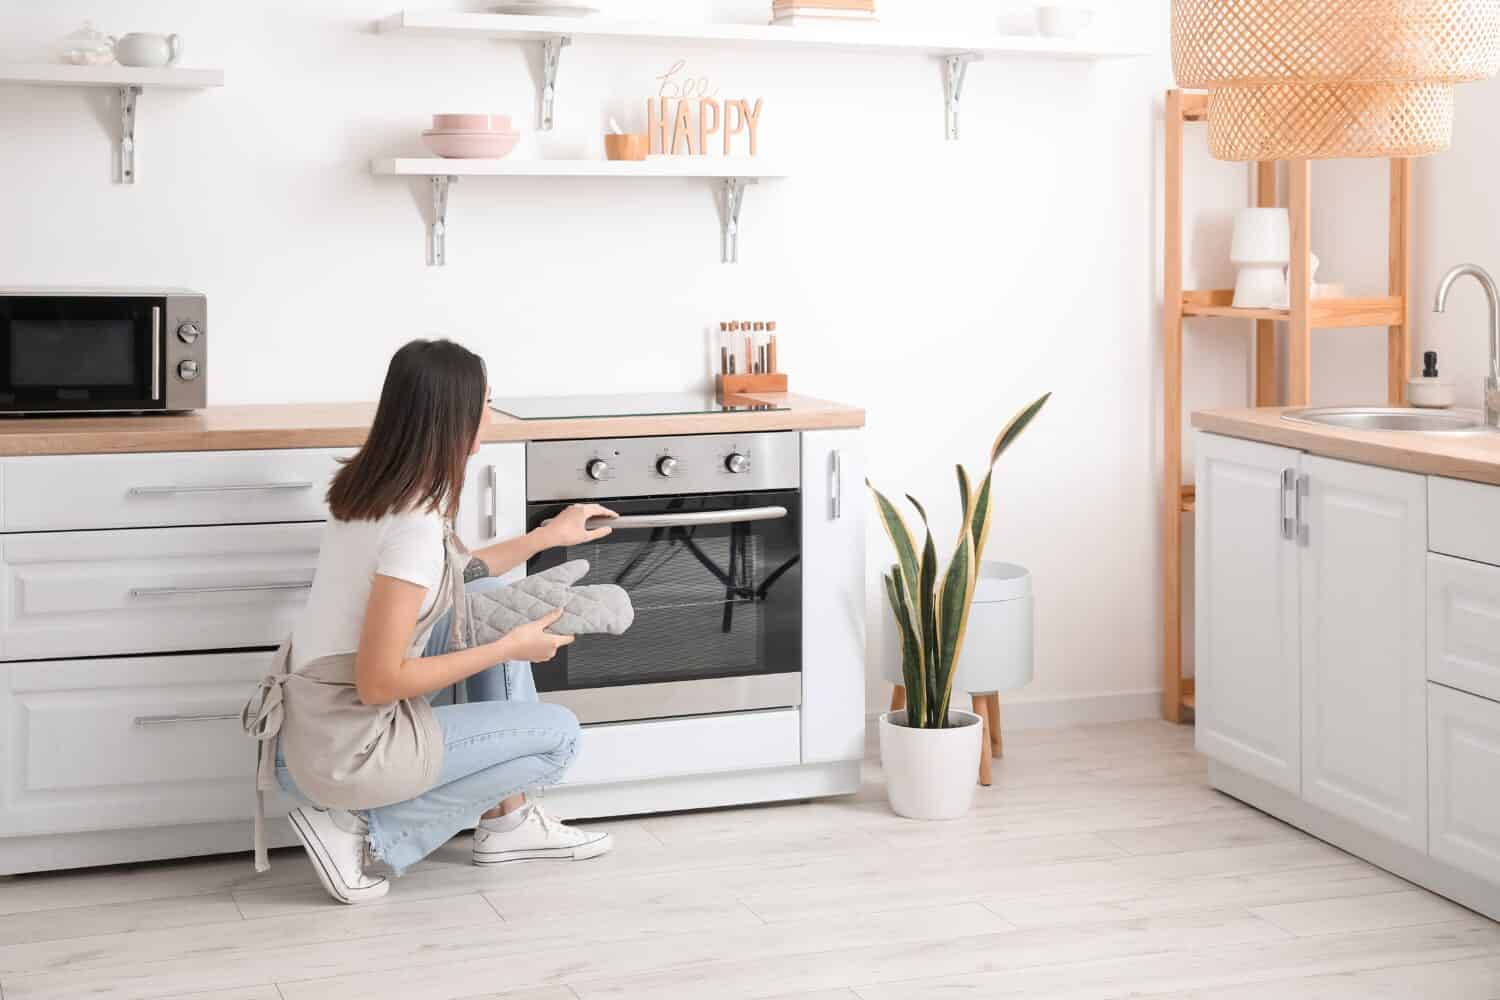 Convection Oven vs. Conventional Oven: 5 Key Differences & How to Cook with  Each